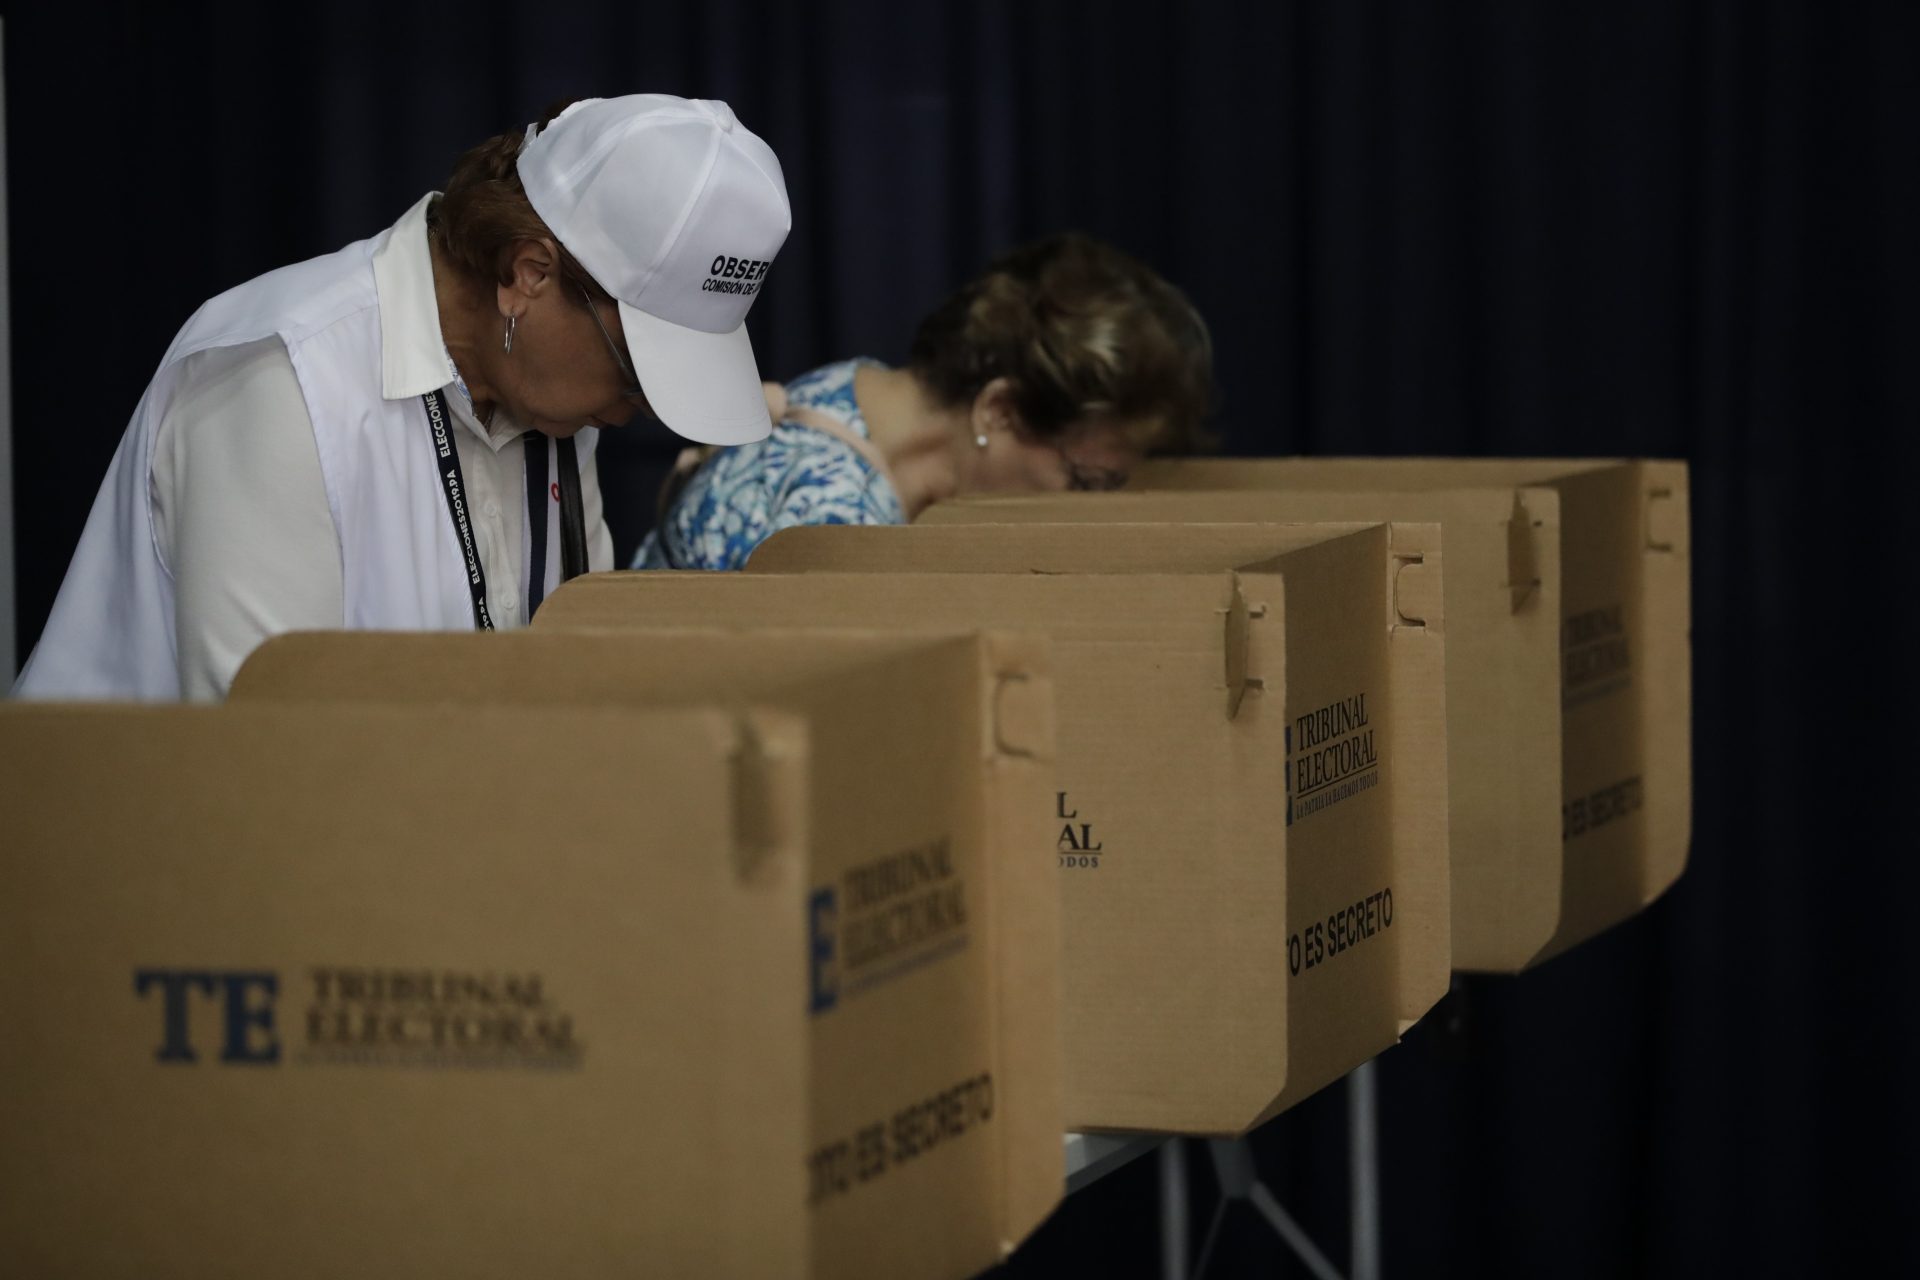 People vote during an electoral day in Panama City (Panama), in a file photograph.  BLAZETRENDS/Welcome Velasco